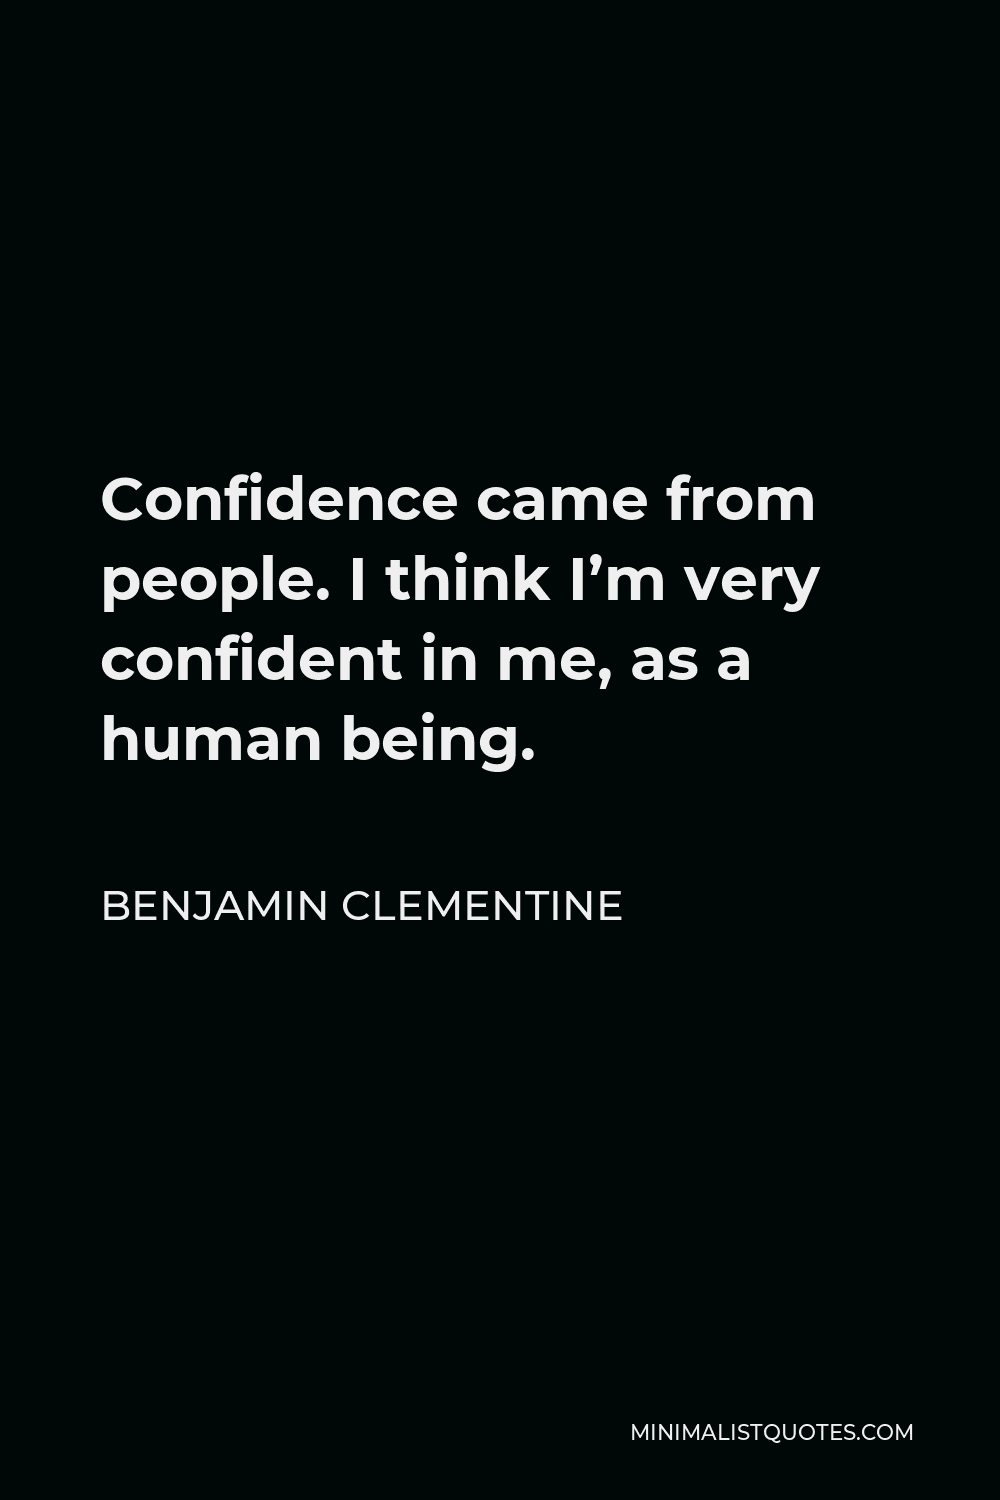 Benjamin Clementine Quote - Confidence came from people. I think I’m very confident in me, as a human being.